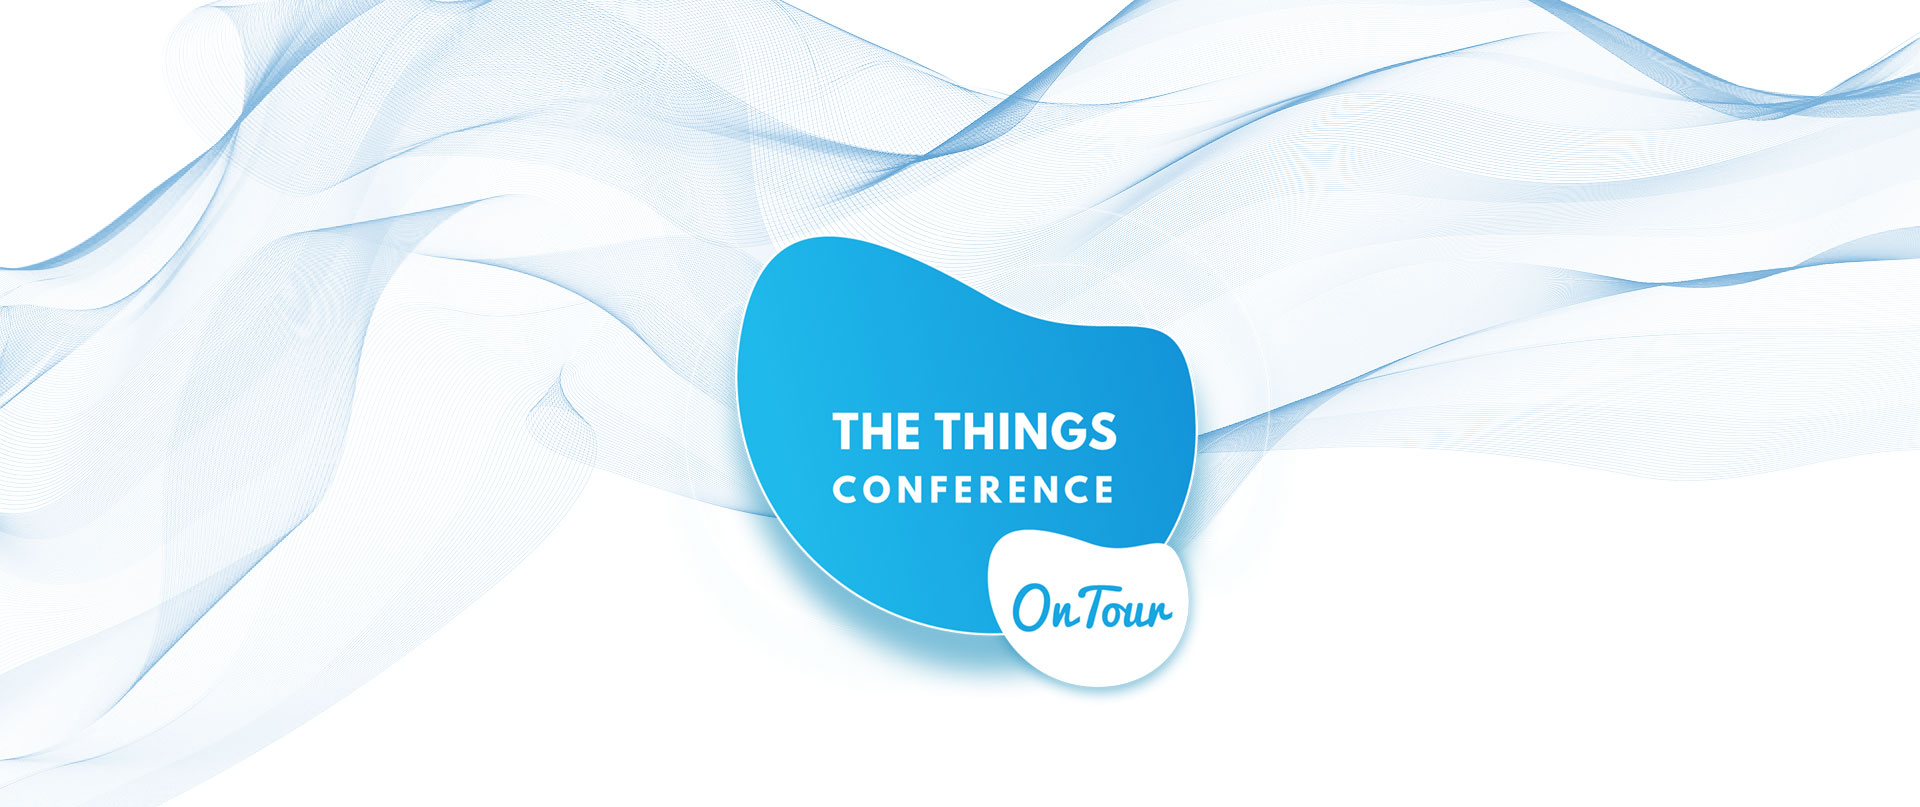 The Things Conference on tour